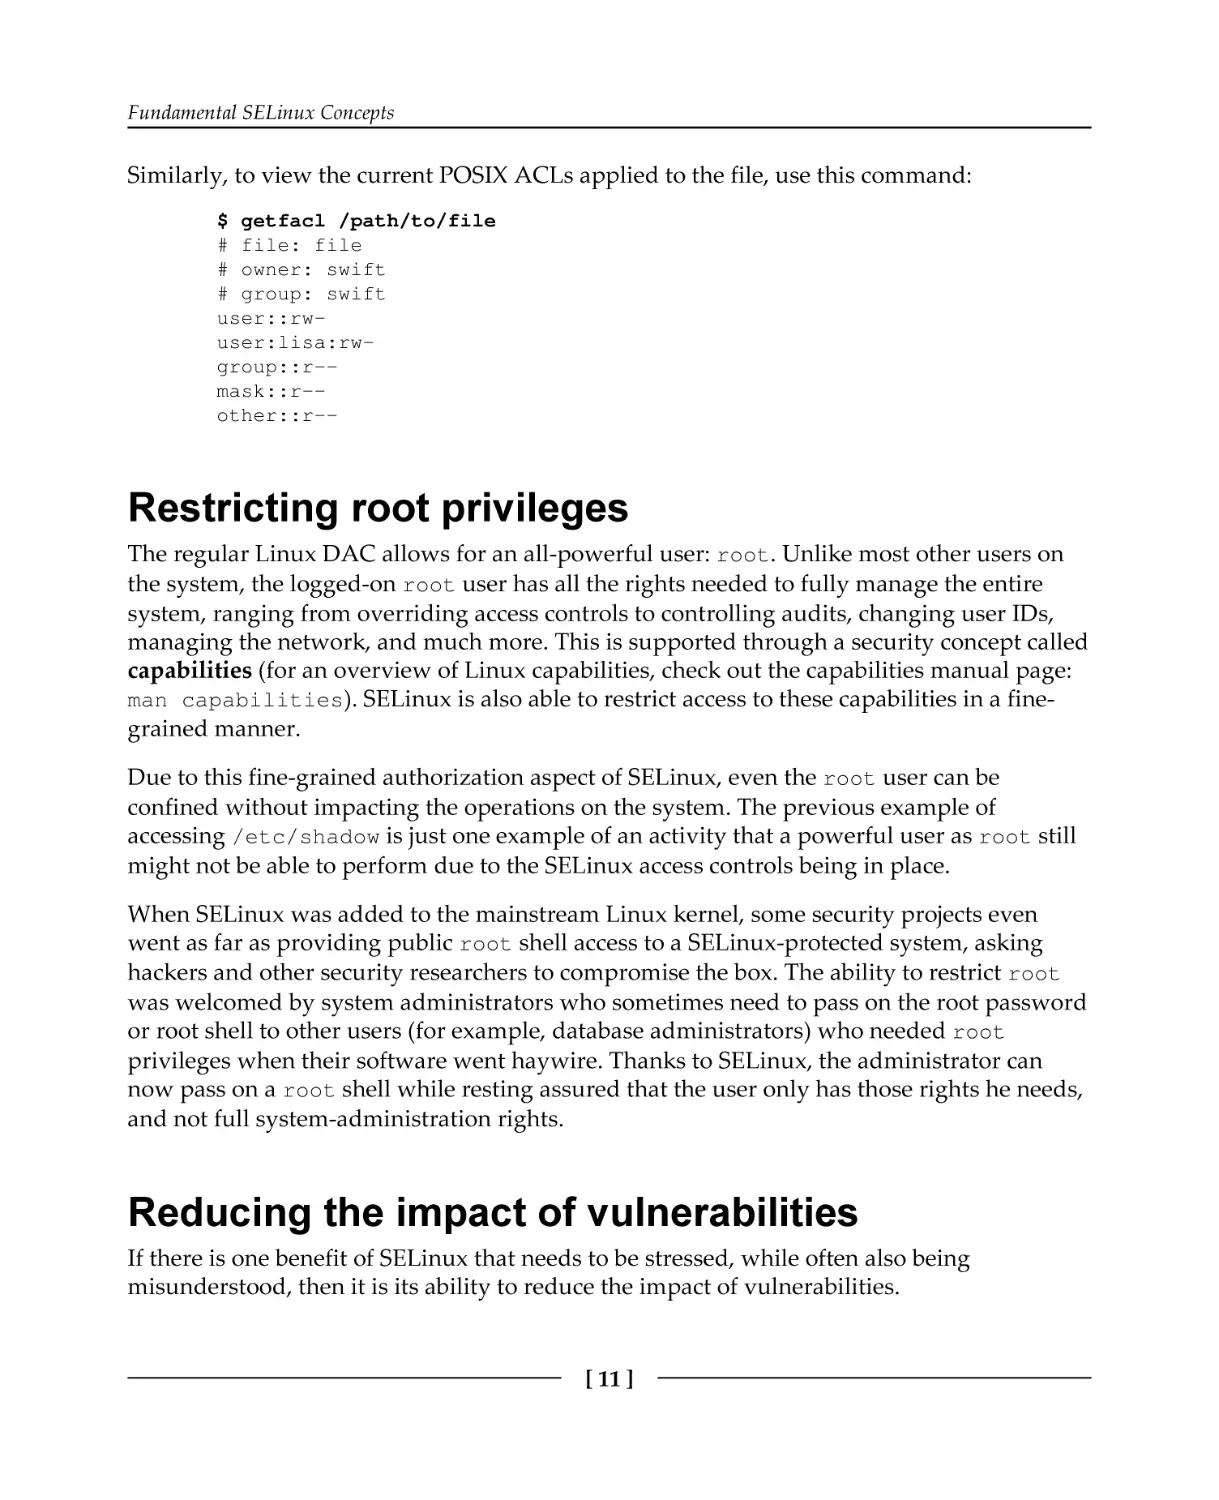 Restricting root privileges
Reducing the impact of vulnerabilities